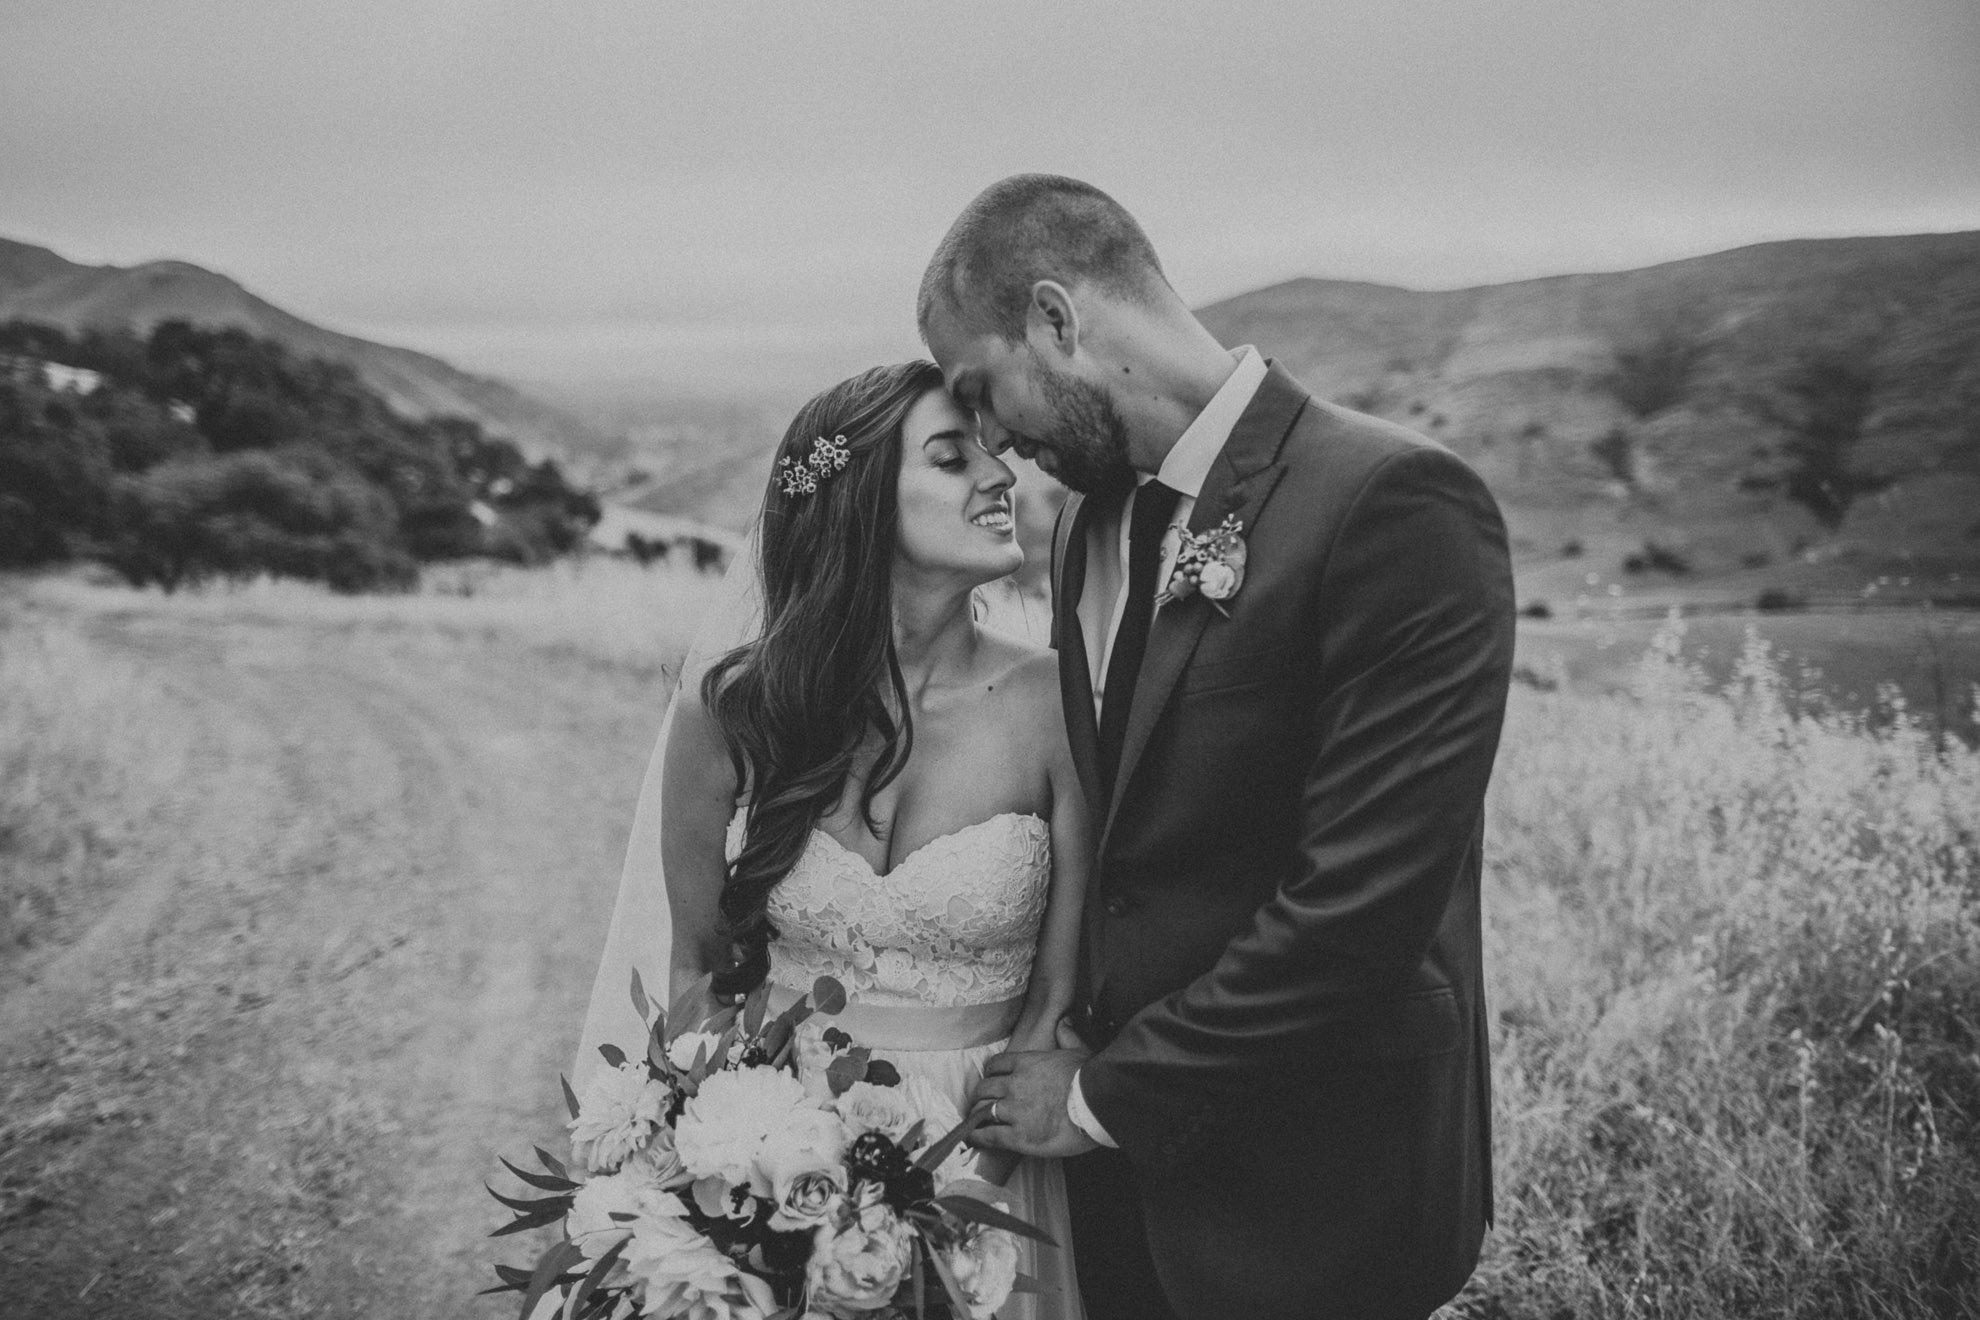 Katie and Ian's La Cuesta Ranch Wedding by Michael Stephens Photography.